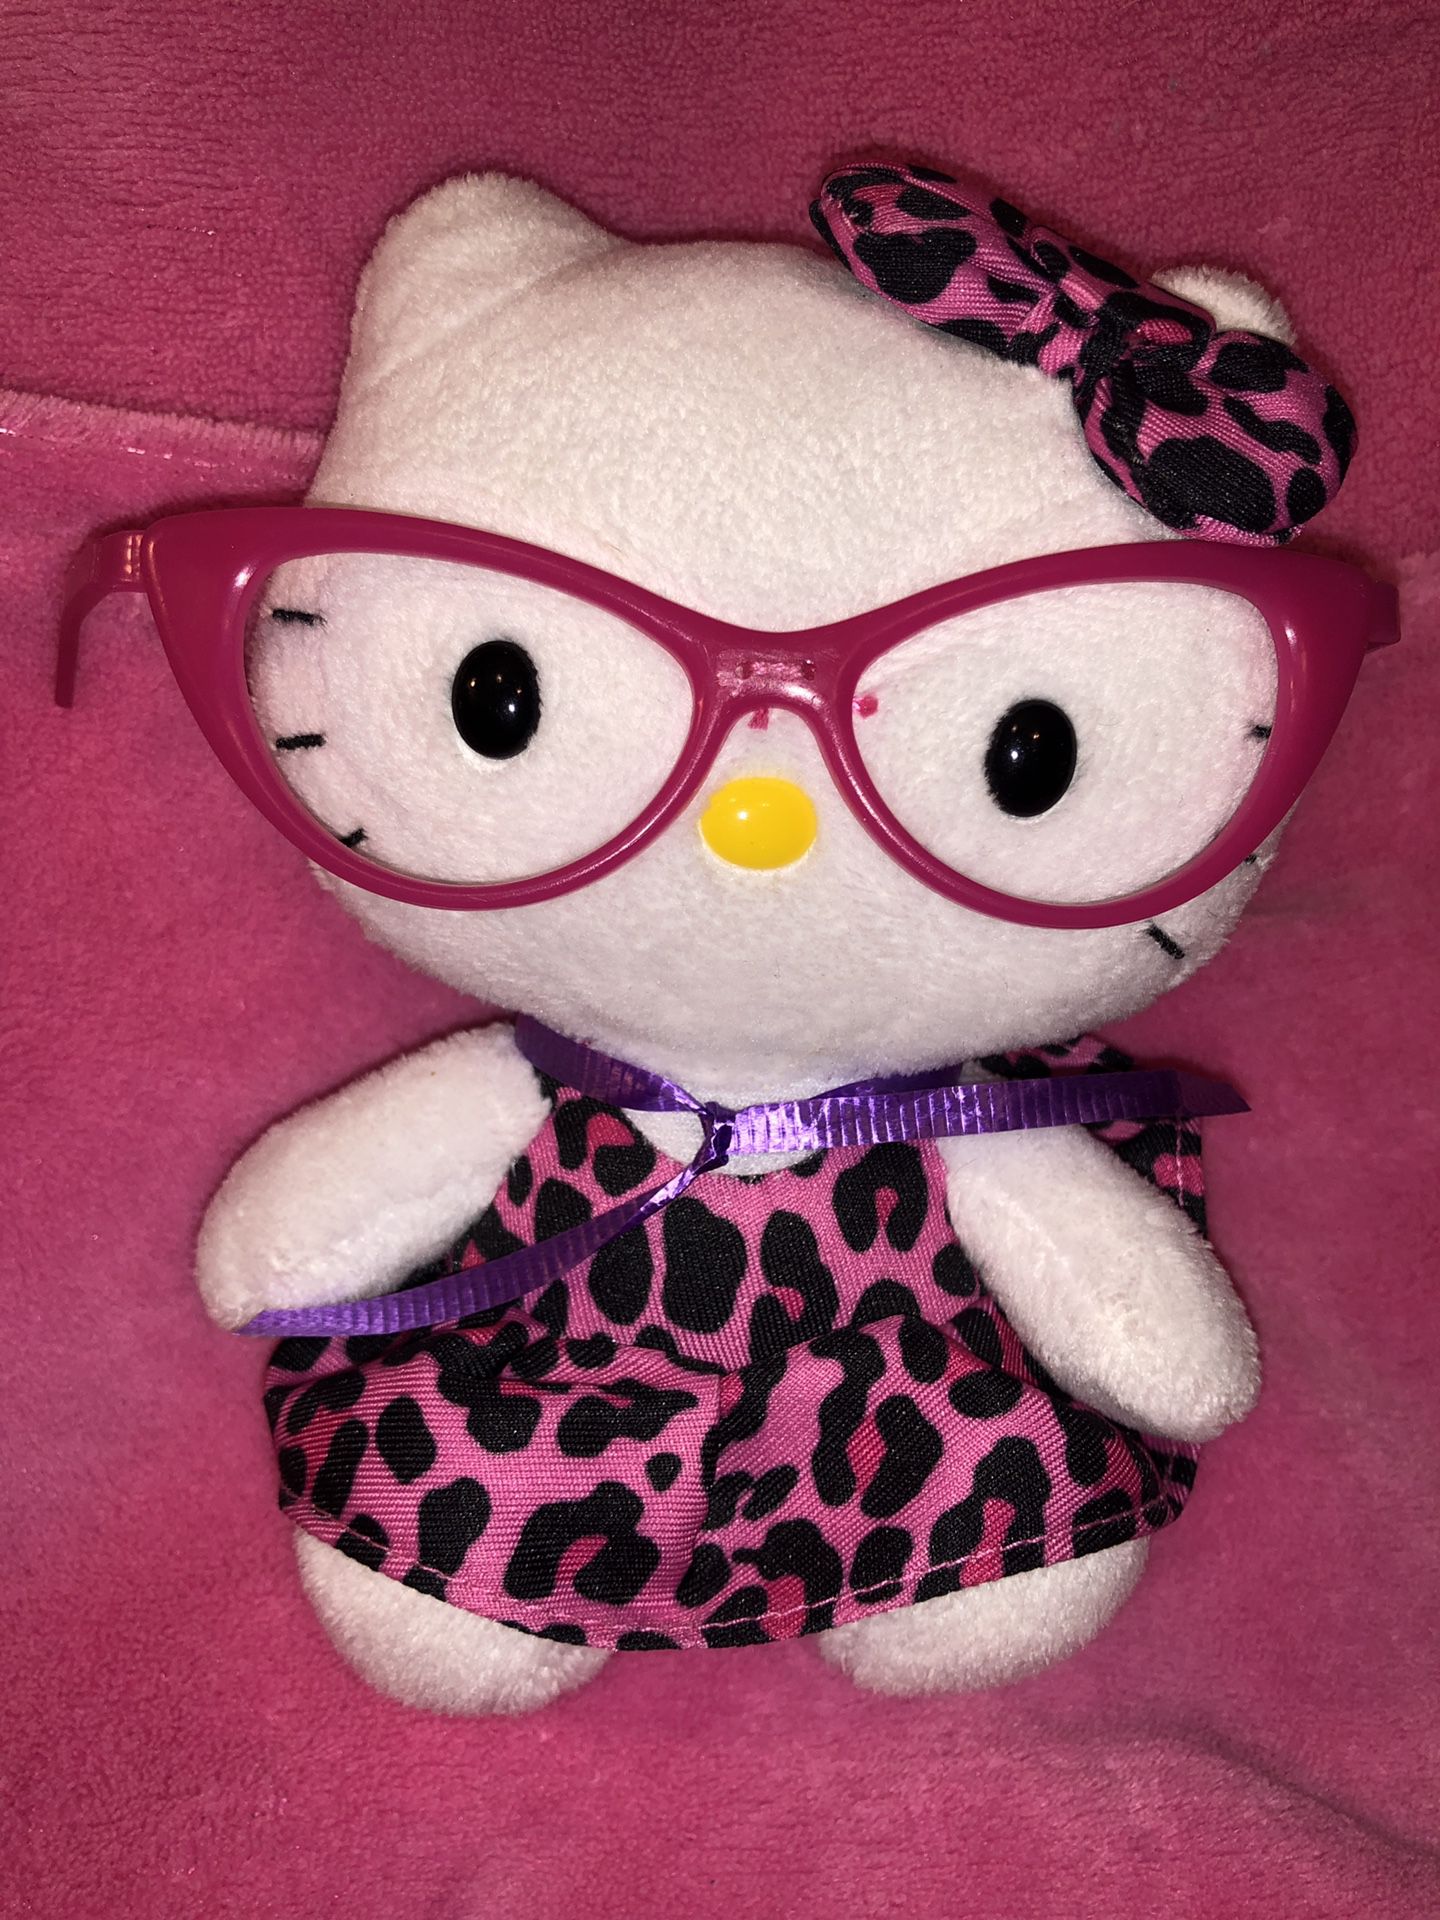 Hello Kitty 6.5” tall pink dress with matching hair bow and glasses plush doll toy $6 sale! 🥳